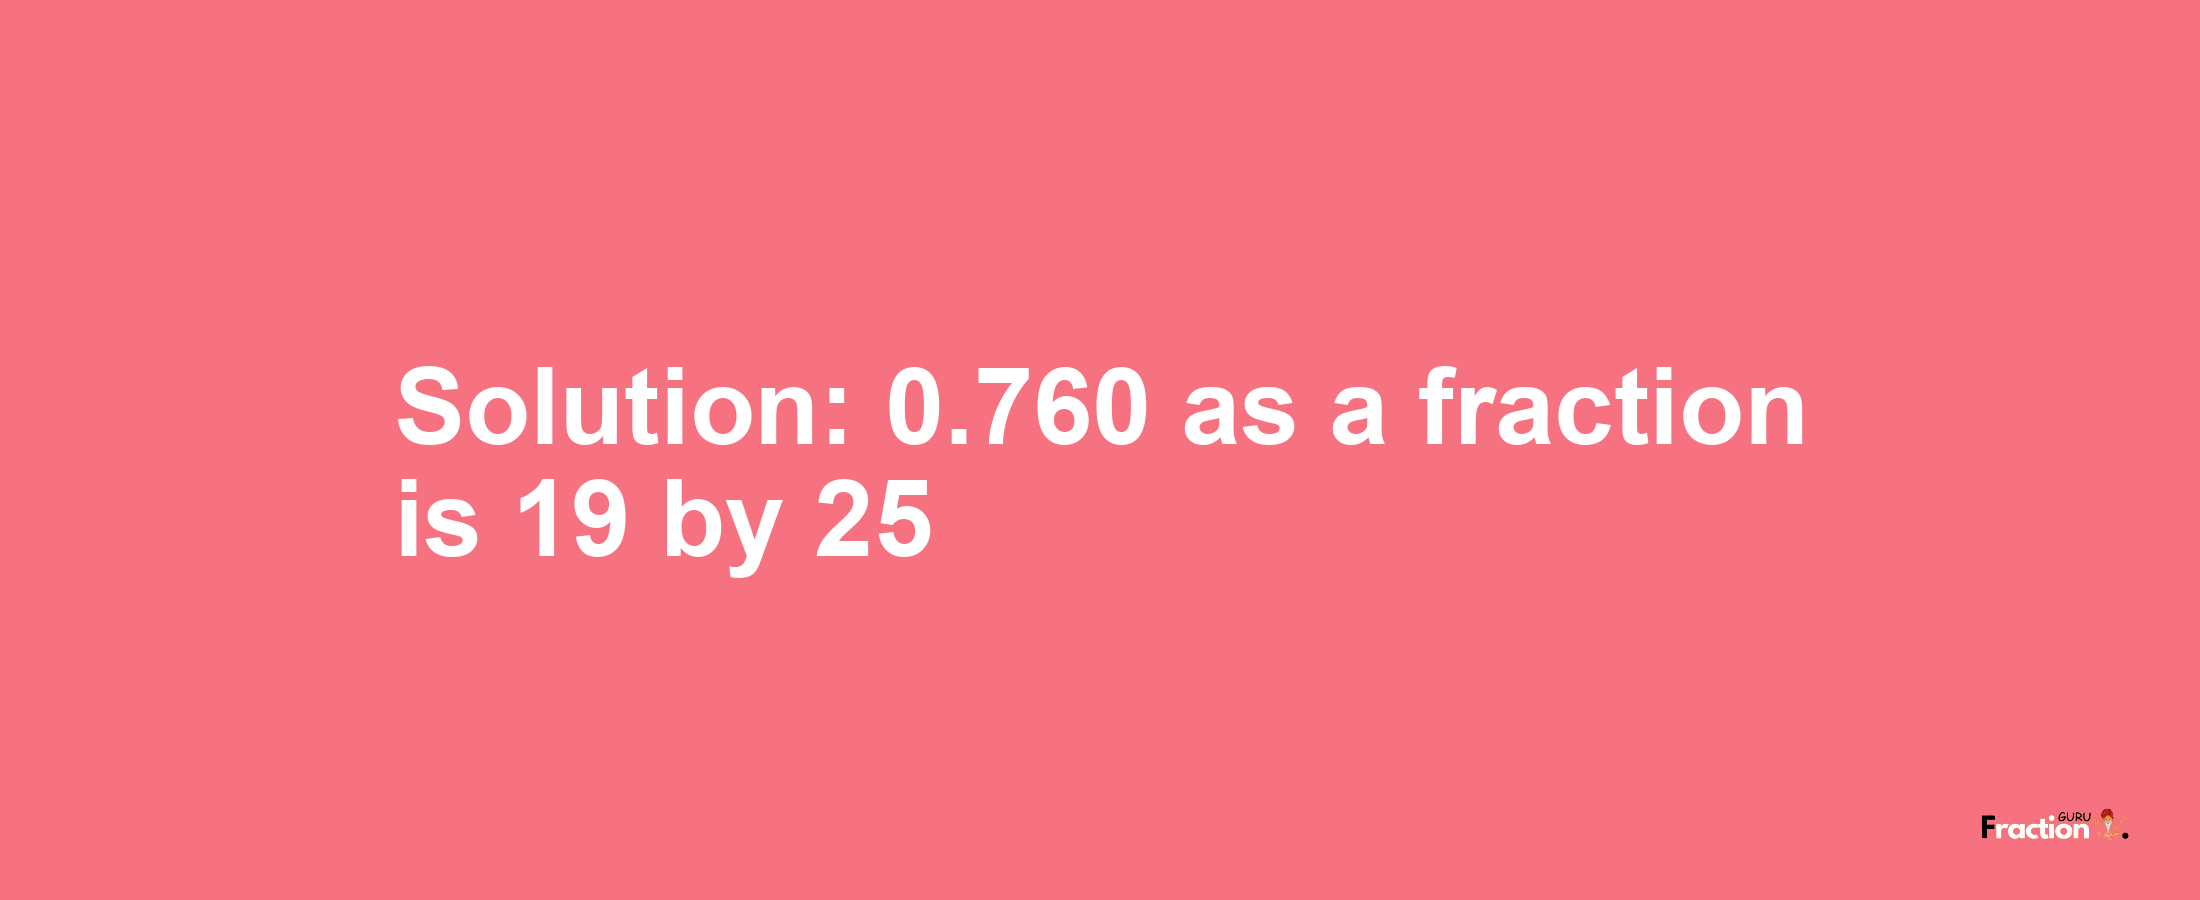 Solution:0.760 as a fraction is 19/25